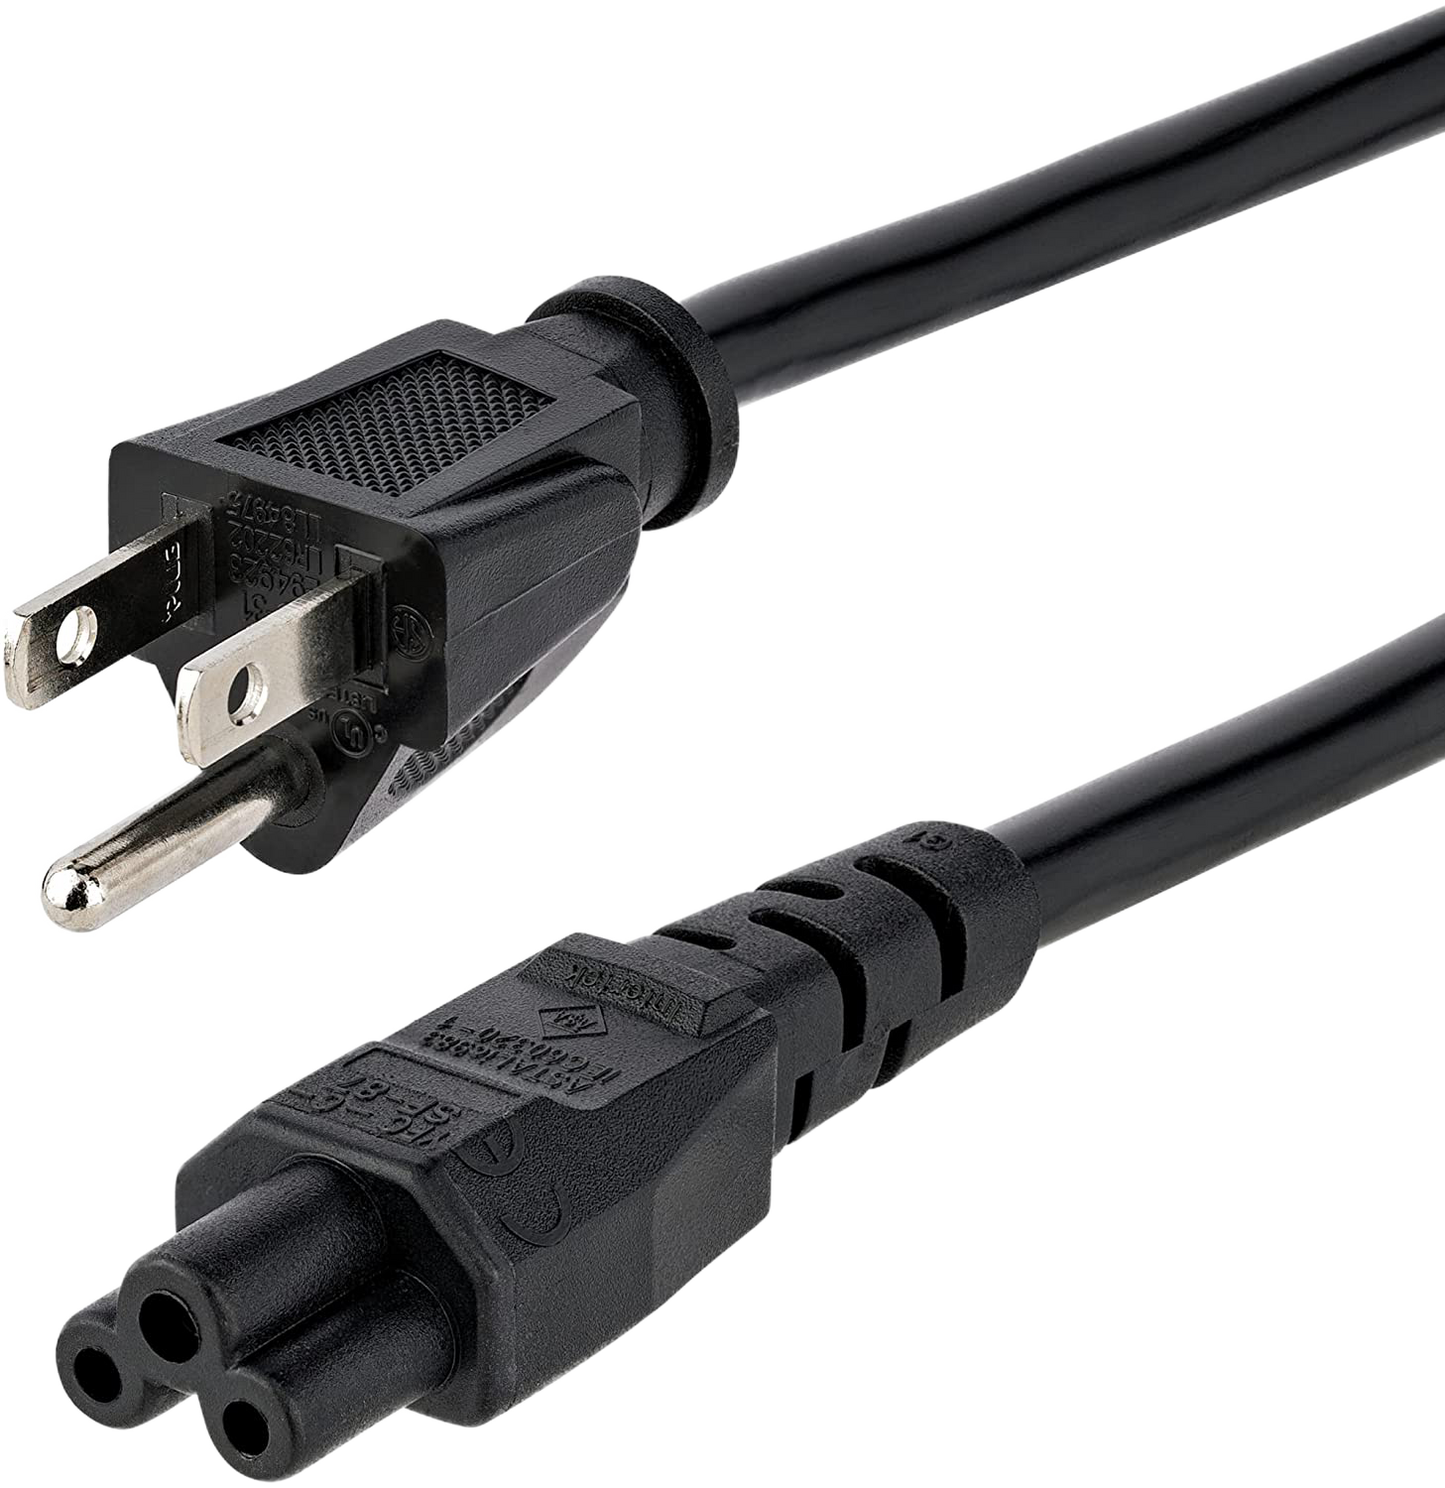 Laptop Power Cord, NEMA 1-15P to C5 (Mickey Mouse), 10A 125V, 18AWG Laptop Replacement Cord